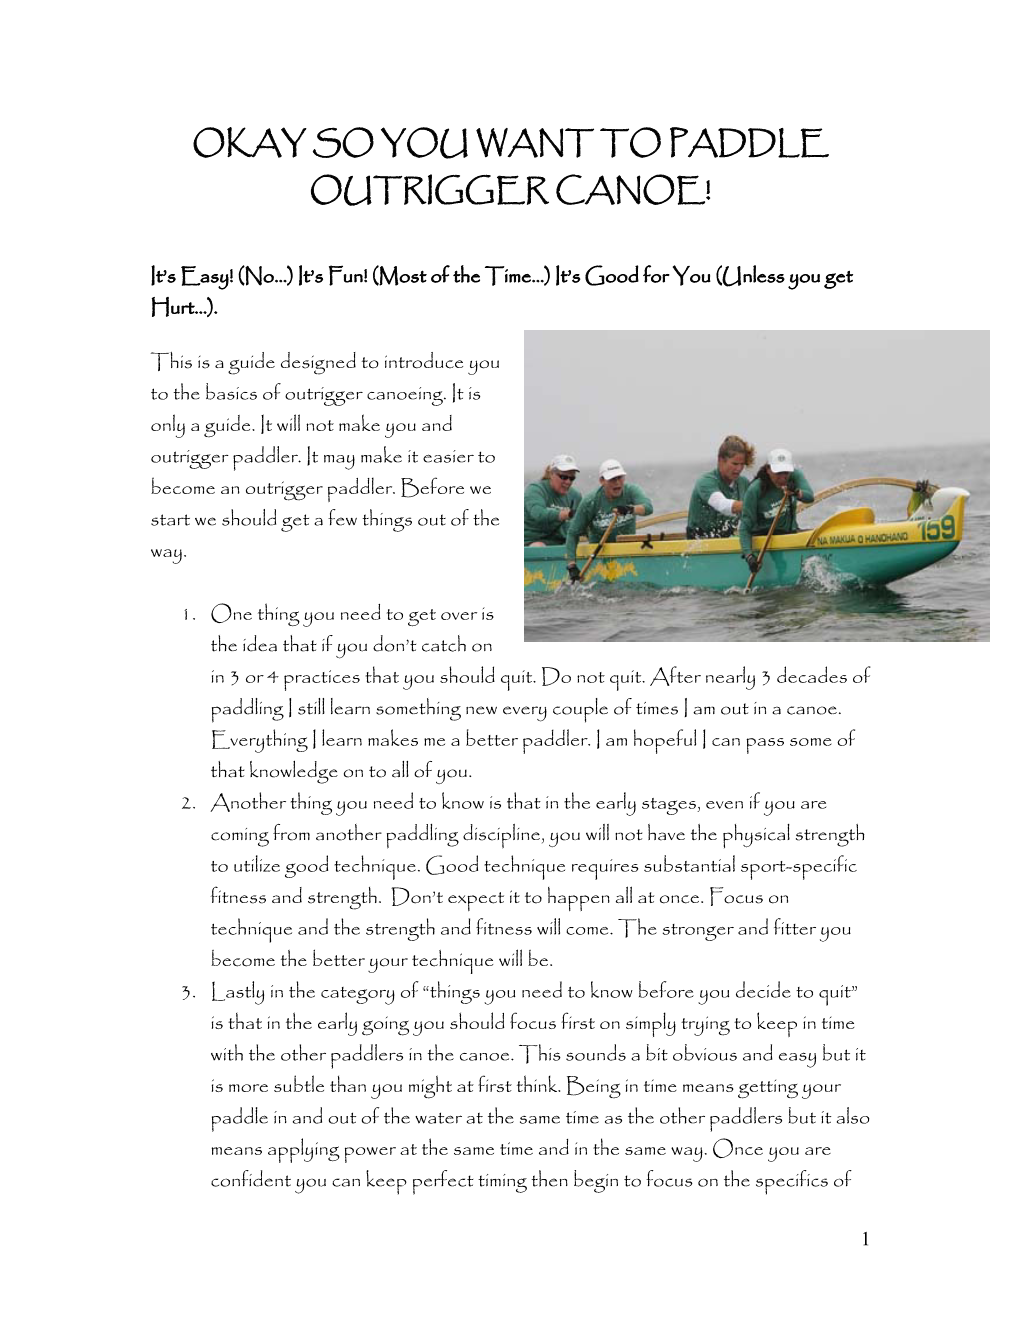 Okay So You Want to Paddle Outrigger Canoe!